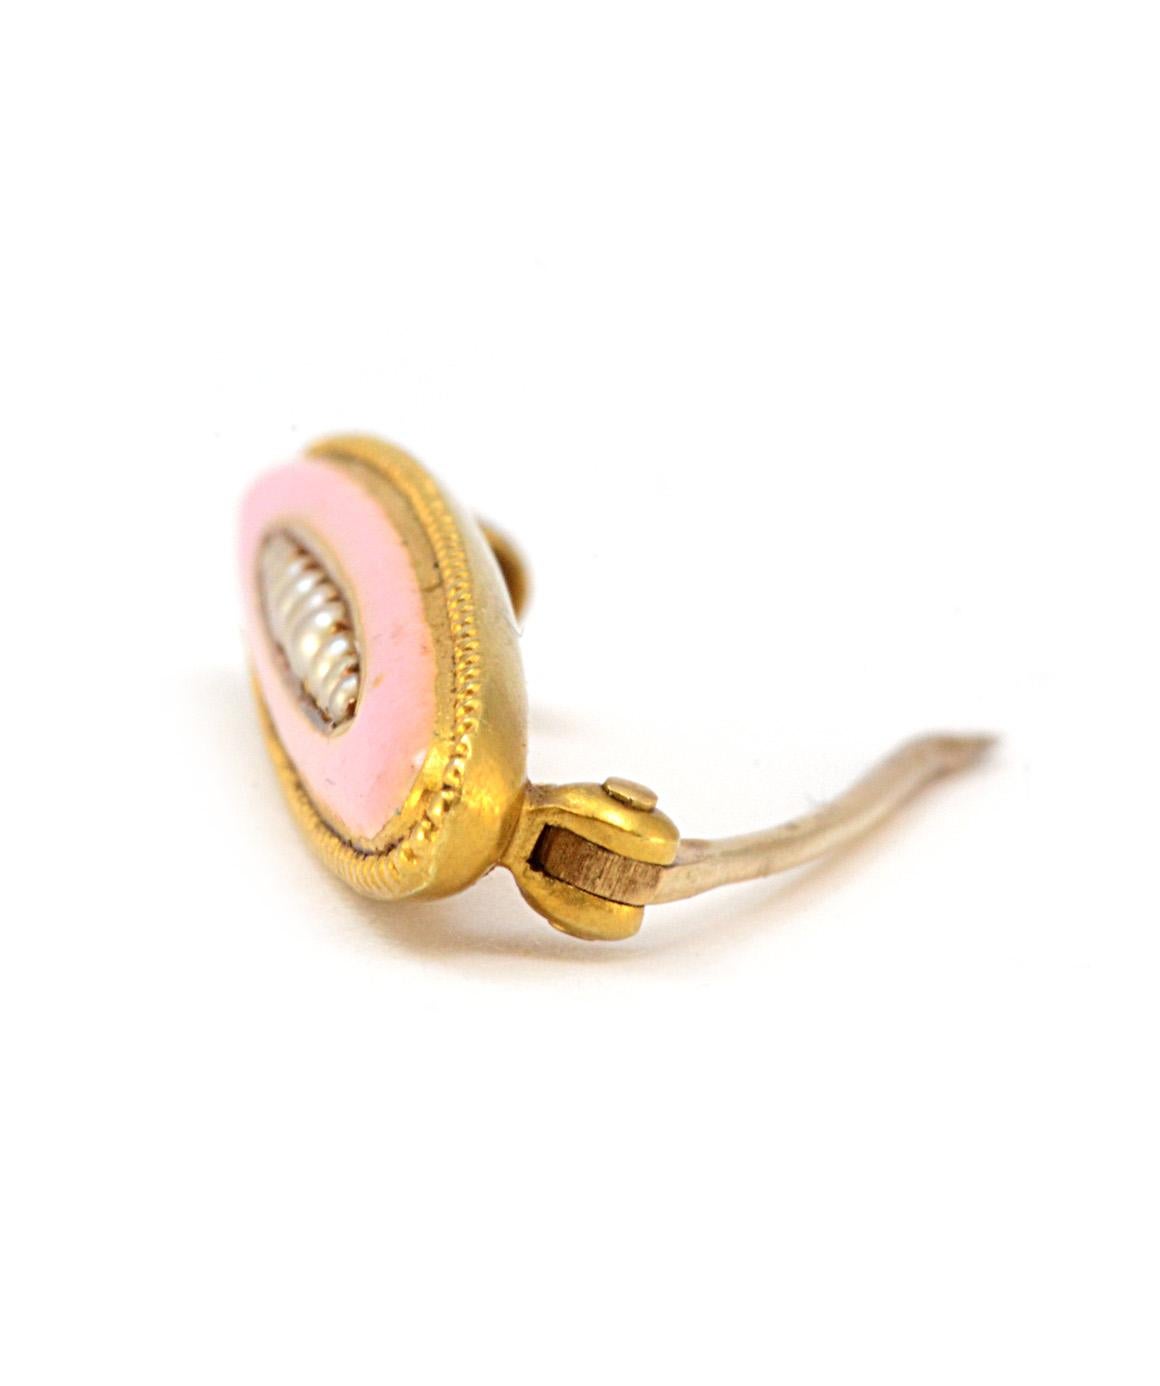 Solid 14K Yellow Gold Pink Enamel & Seed Pearl Lingerie Pin 1.8g
Excellent condition. This lingerie pin is composed of solid 14k yellow gold and features pink enamel and 9 seed pearls. The pin measures approximately 1.10in X 0.25in and weighs 1.8